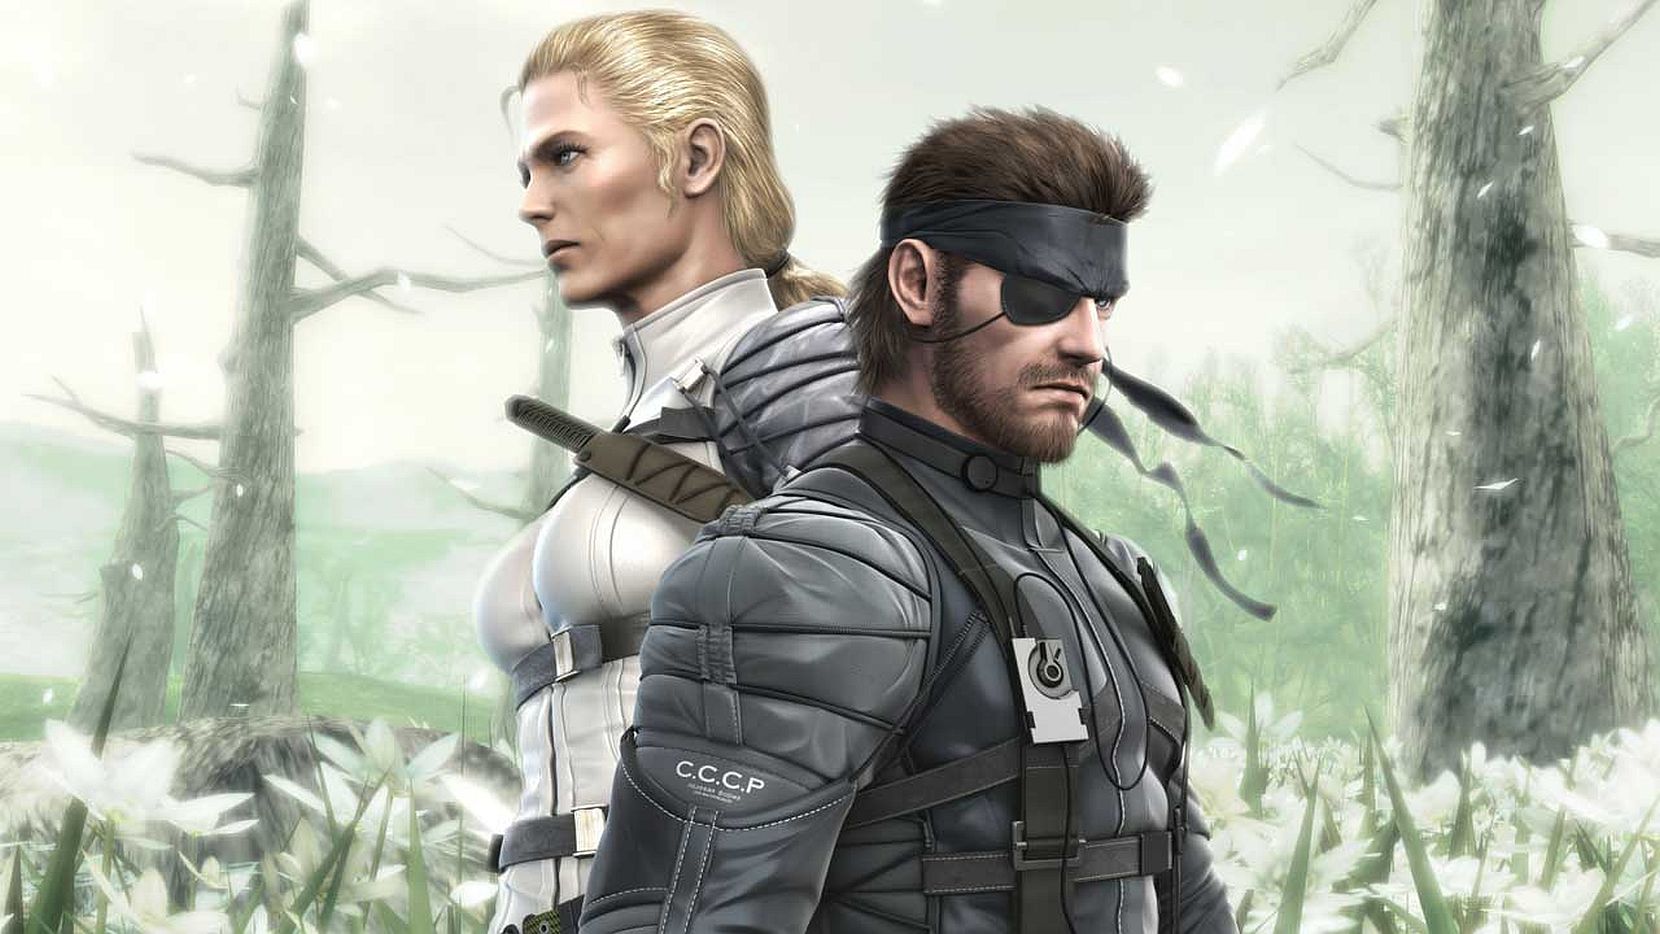 Image for Castlevania reimagining and Metal Gear 3 remake in the works at Konami - report